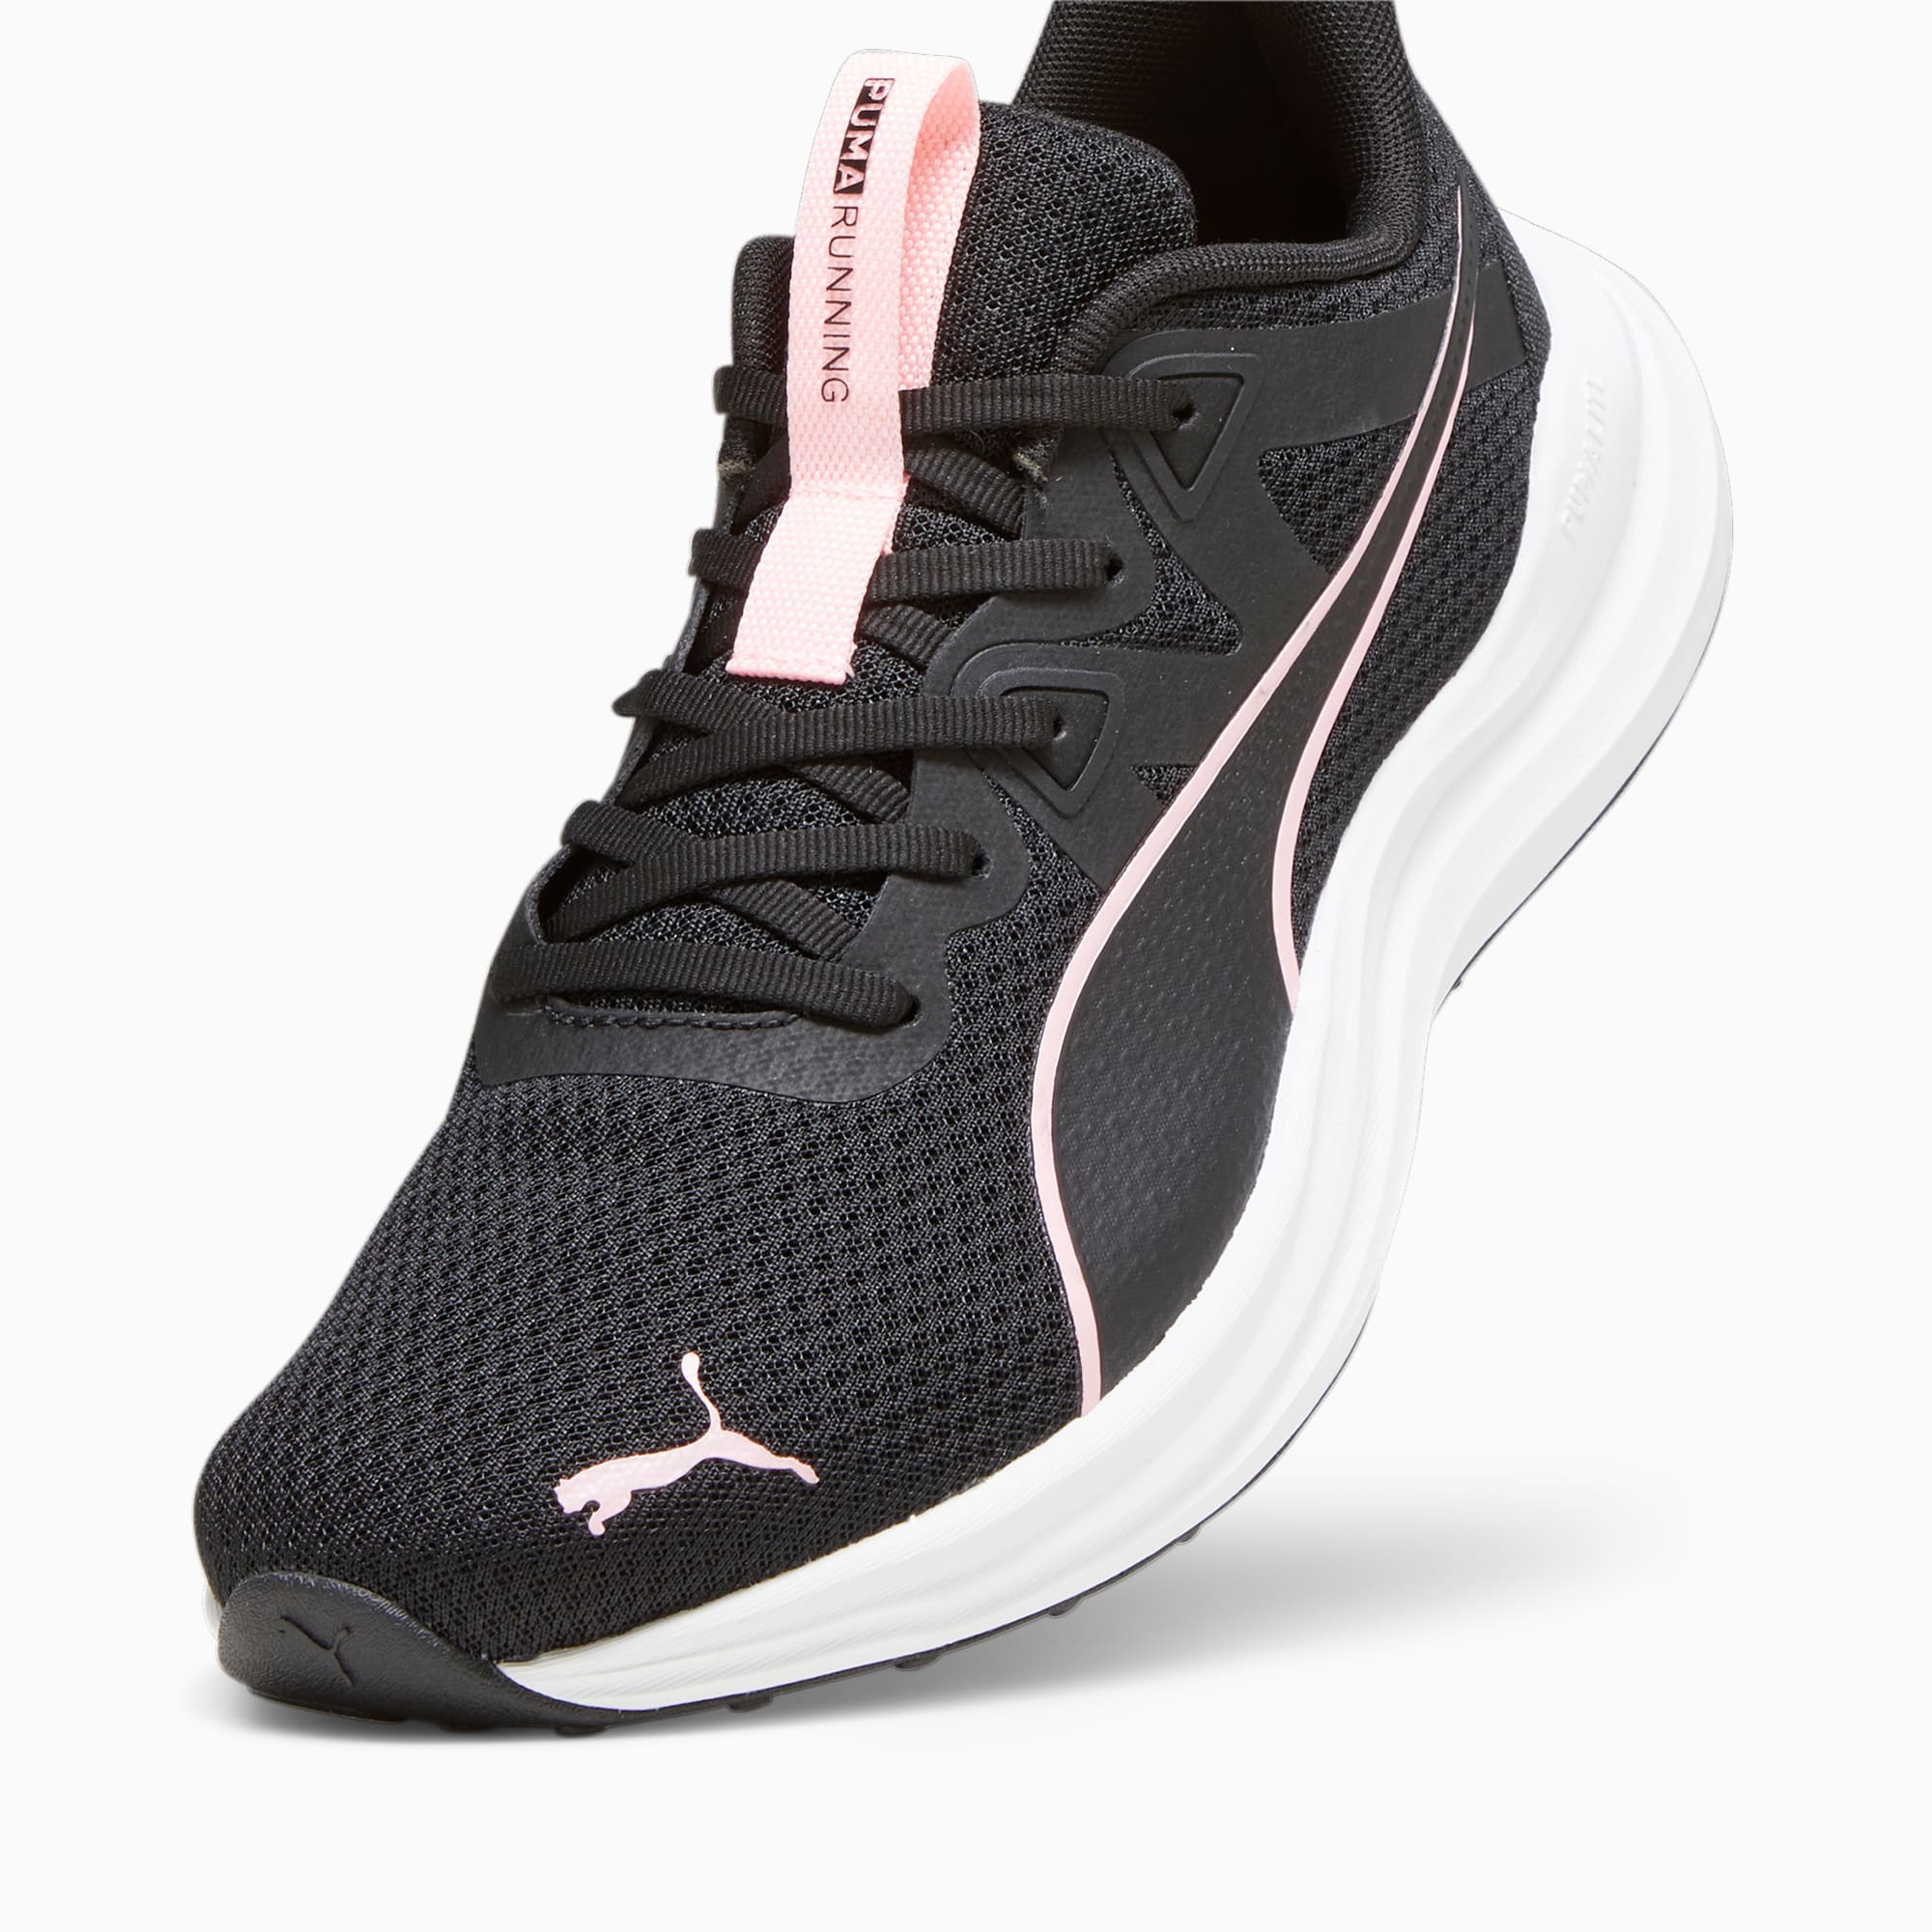 Women's PUMA Reflect Lite Running Shoes, Black/Koral Ice/White, Size 35,5, Shoes